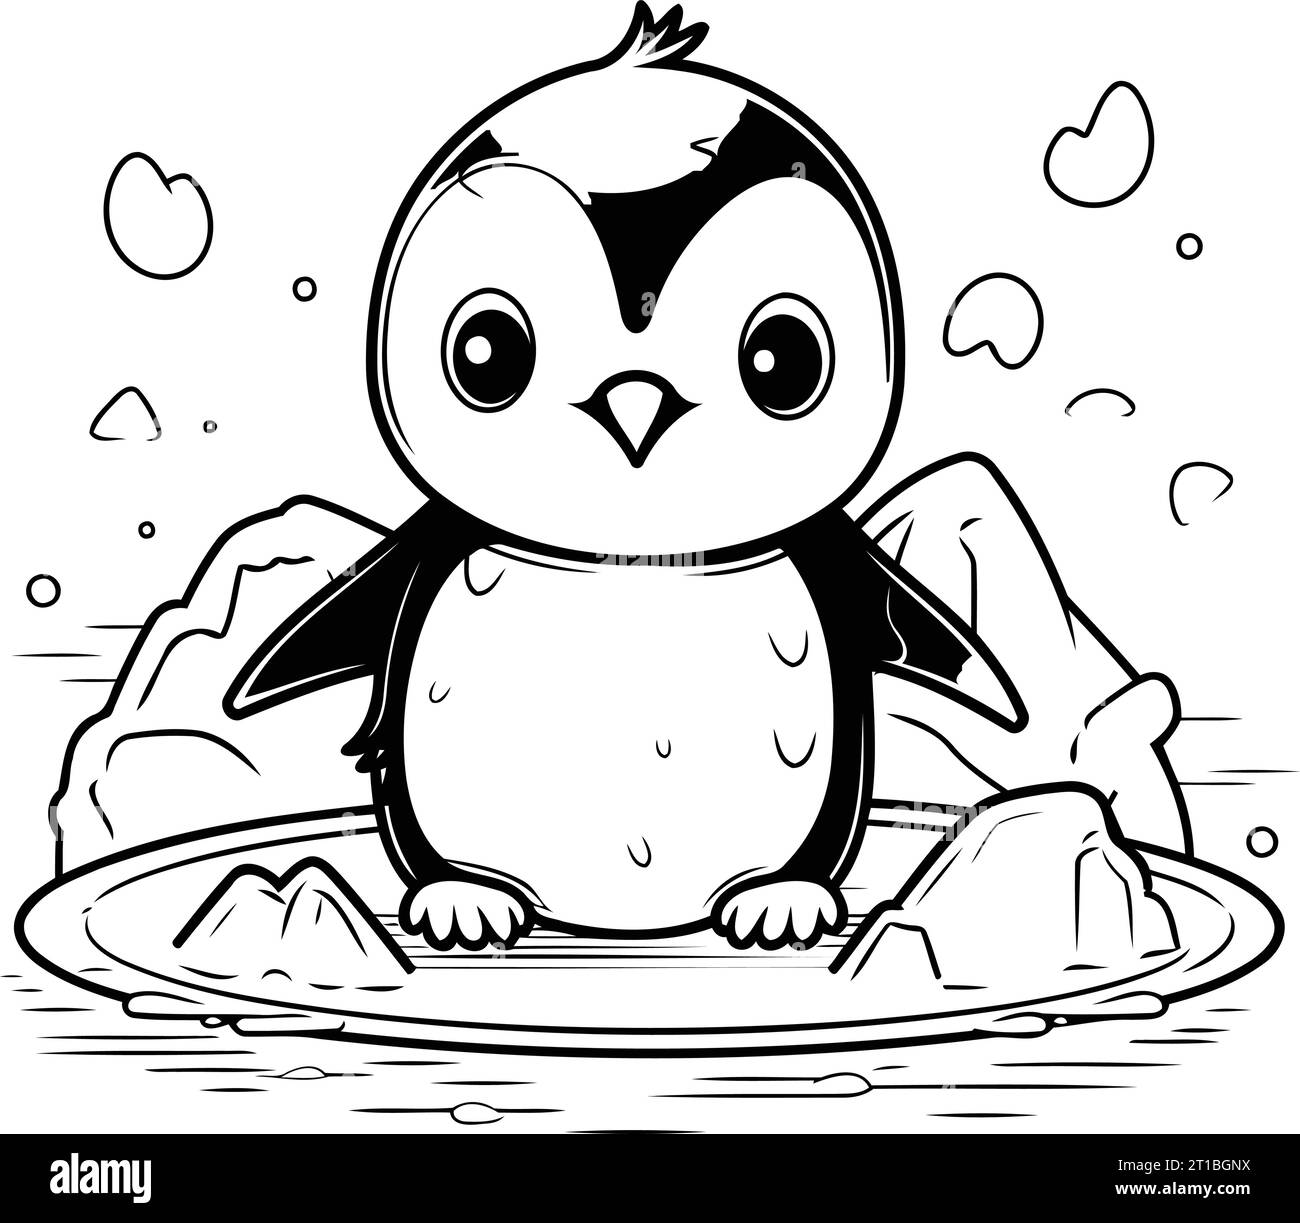 Cute cartoon penguin sitting on ice. Vector illustration for coloring book. Stock Vector